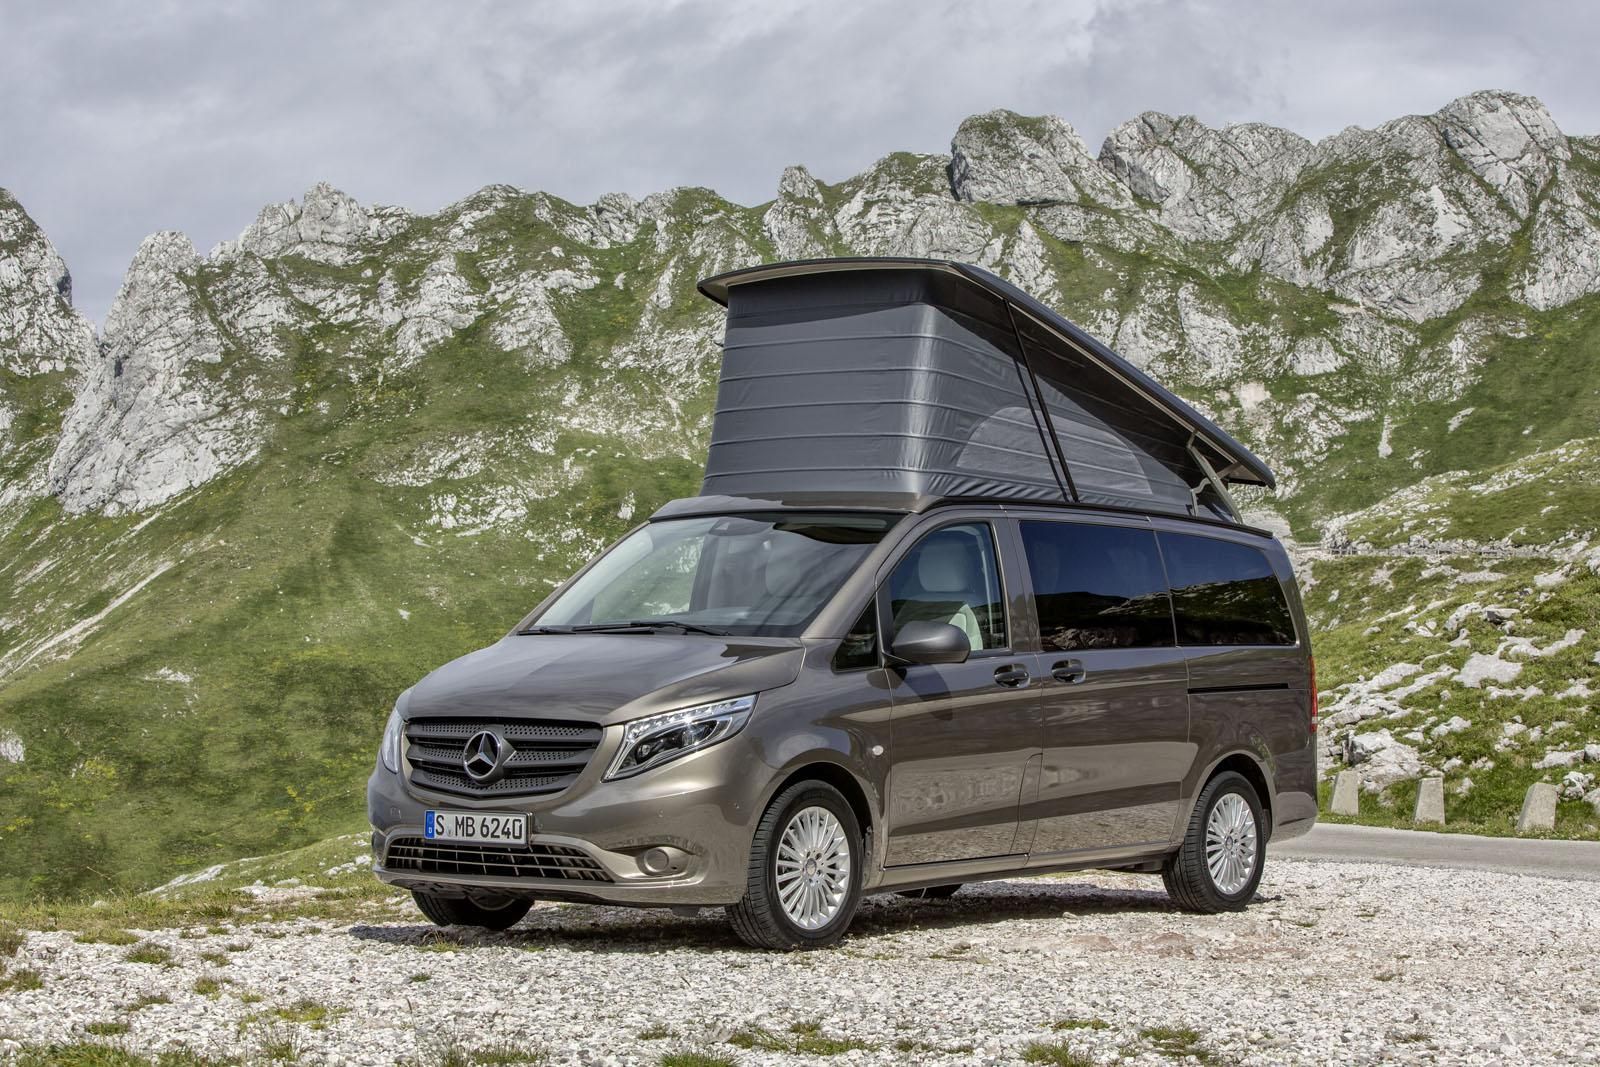 MERCEDES VTO MARCO POLO RESM GALERS